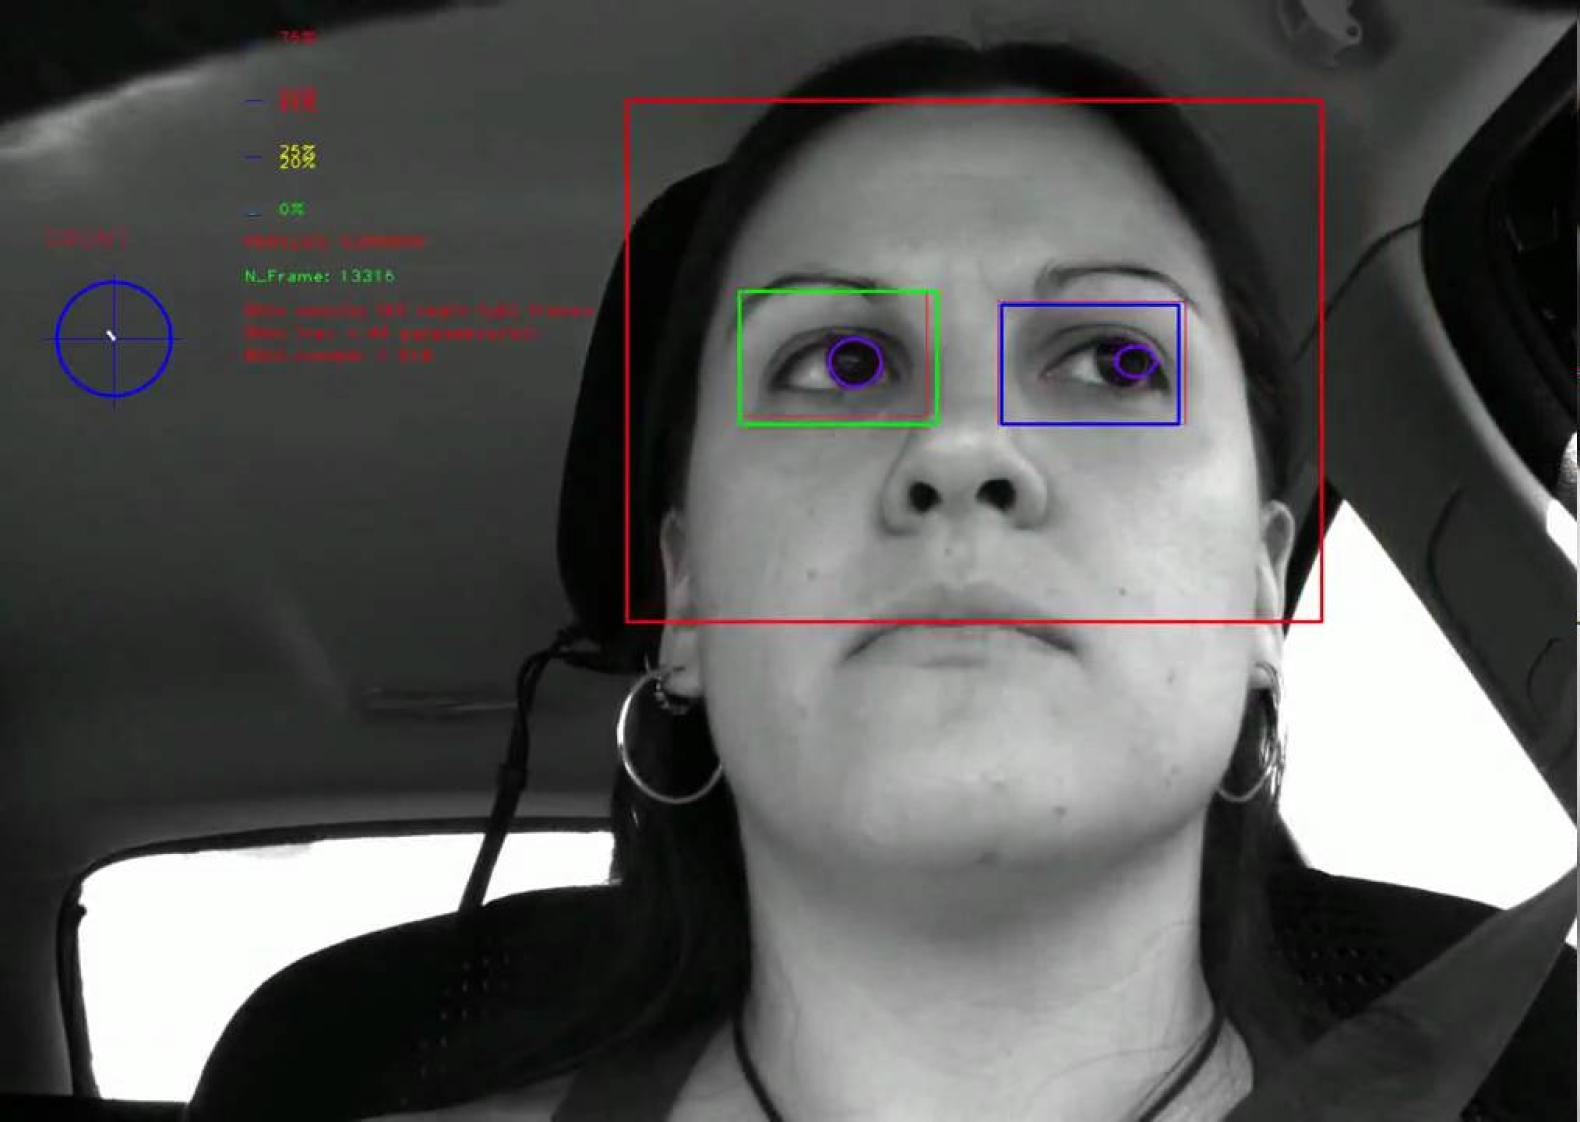 A driver monitoring camera mounted on the interiors of the vehicle to monitor driver behavior using image recognition